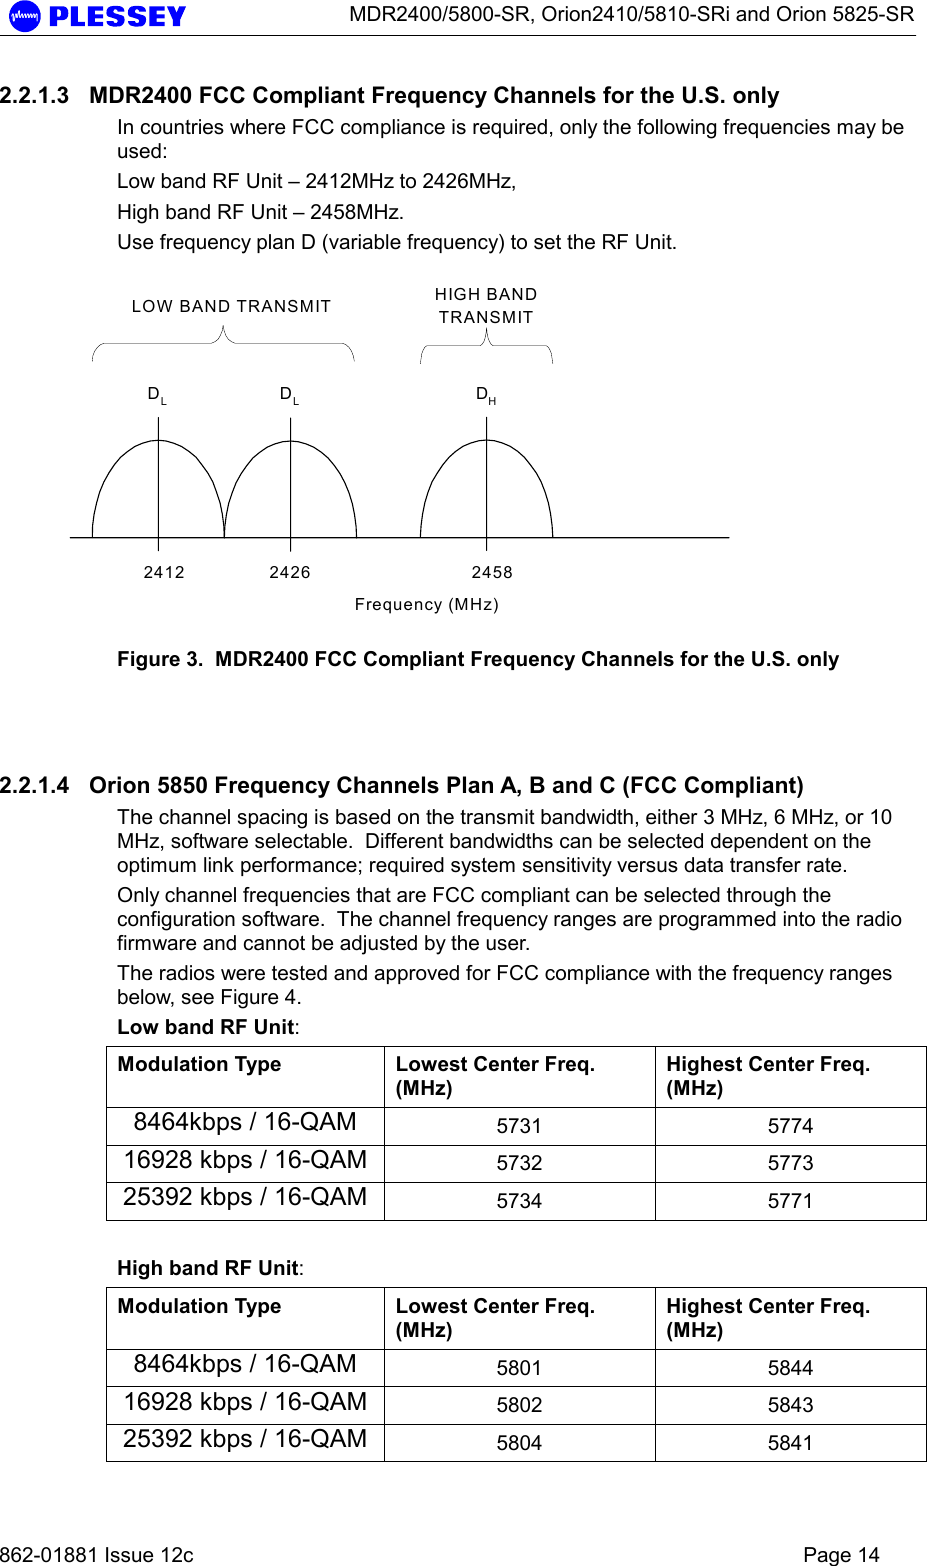      MDR2400/5800-SR, Orion2410/5810-SRi and Orion 5825-SR   862-01881 Issue 12c    Page 14 2.2.1.3  MDR2400 FCC Compliant Frequency Channels for the U.S. only In countries where FCC compliance is required, only the following frequencies may be used: Low band RF Unit – 2412MHz to 2426MHz, High band RF Unit – 2458MHz. Use frequency plan D (variable frequency) to set the RF Unit. DHFrequency (MHz)LOW BAND TRANSMIT HIGH BANDTRANSMITDLDL2412 2426 2458 Figure 3.  MDR2400 FCC Compliant Frequency Channels for the U.S. only   2.2.1.4  Orion 5850 Frequency Channels Plan A, B and C (FCC Compliant) The channel spacing is based on the transmit bandwidth, either 3 MHz, 6 MHz, or 10 MHz, software selectable.  Different bandwidths can be selected dependent on the optimum link performance; required system sensitivity versus data transfer rate. Only channel frequencies that are FCC compliant can be selected through the configuration software.  The channel frequency ranges are programmed into the radio firmware and cannot be adjusted by the user. The radios were tested and approved for FCC compliance with the frequency ranges below, see Figure 4. Low band RF Unit: Modulation Type  Lowest Center Freq. (MHz) Highest Center Freq. (MHz) 8464kbps / 16-QAM  5731 5774 16928 kbps / 16-QAM  5732 5773 25392 kbps / 16-QAM  5734 5771  High band RF Unit: Modulation Type  Lowest Center Freq. (MHz) Highest Center Freq. (MHz) 8464kbps / 16-QAM  5801 5844 16928 kbps / 16-QAM  5802 5843 25392 kbps / 16-QAM  5804 5841 